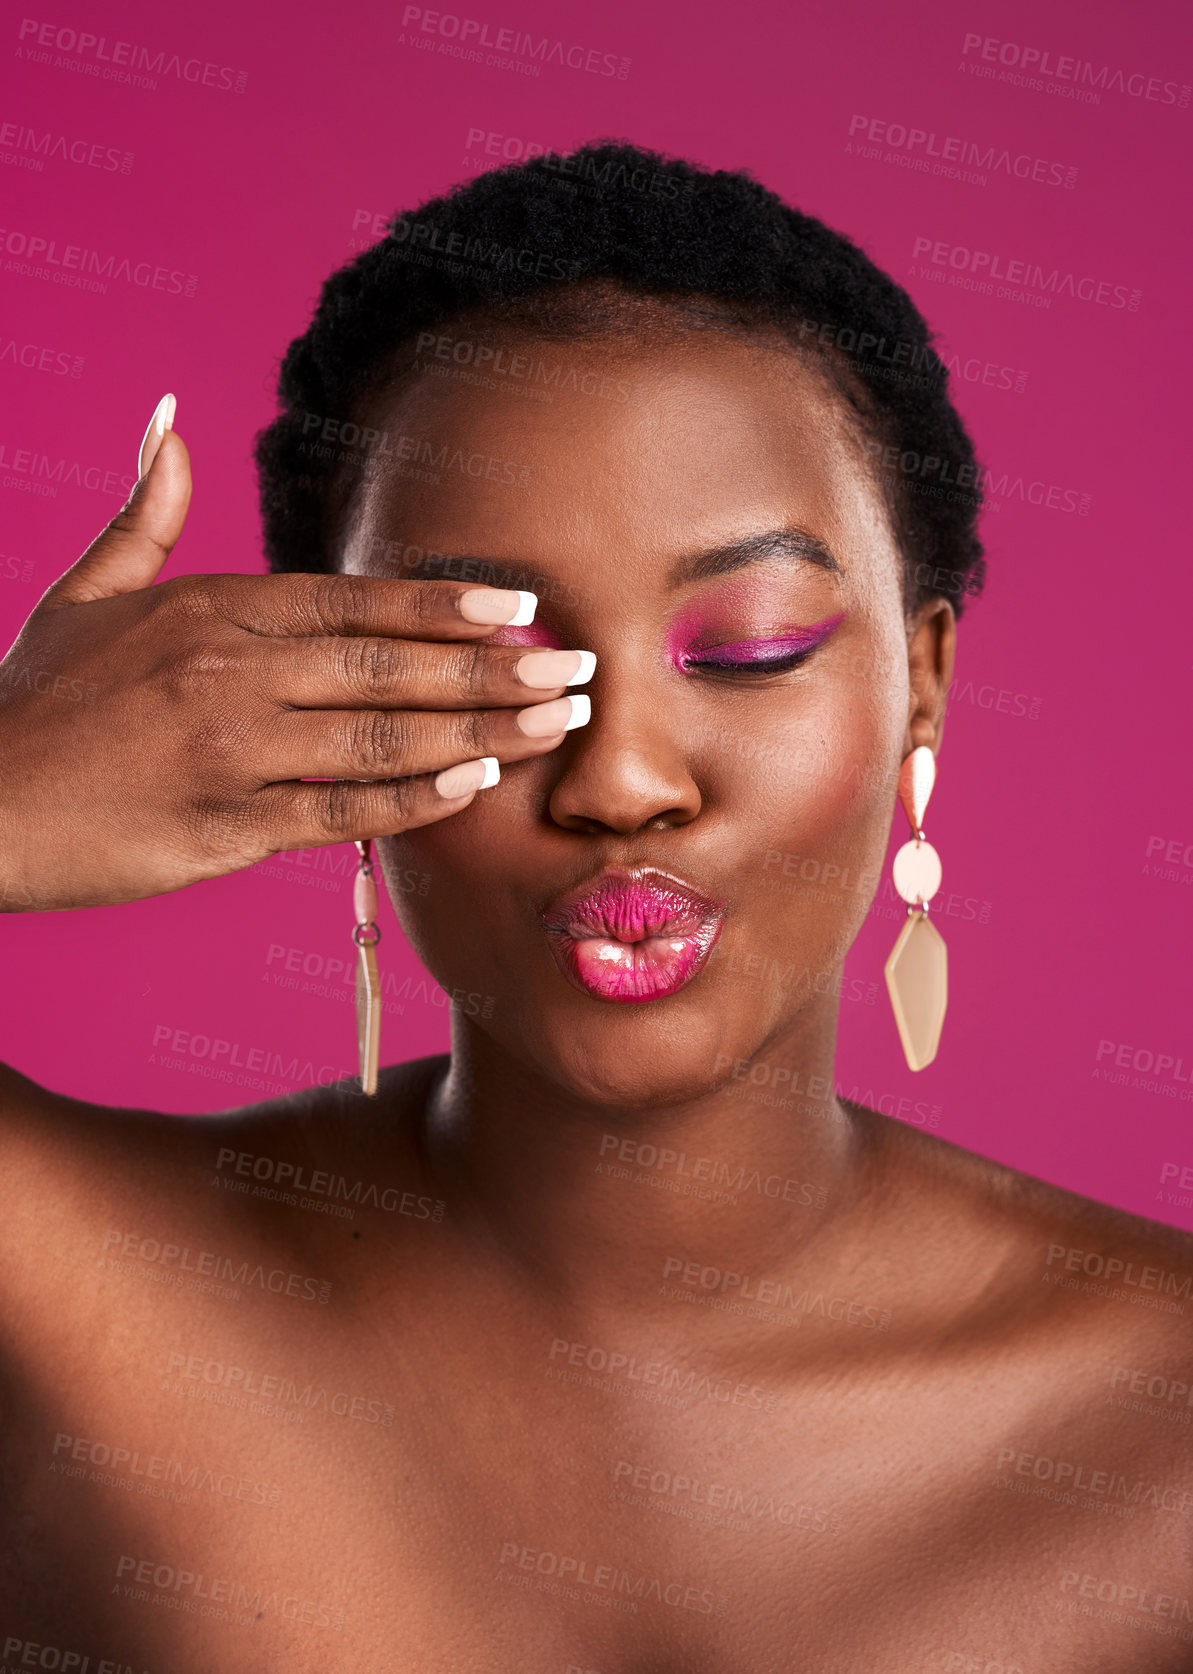 Buy stock photo Studio shot of a beautiful young woman covering her eye against a pink background